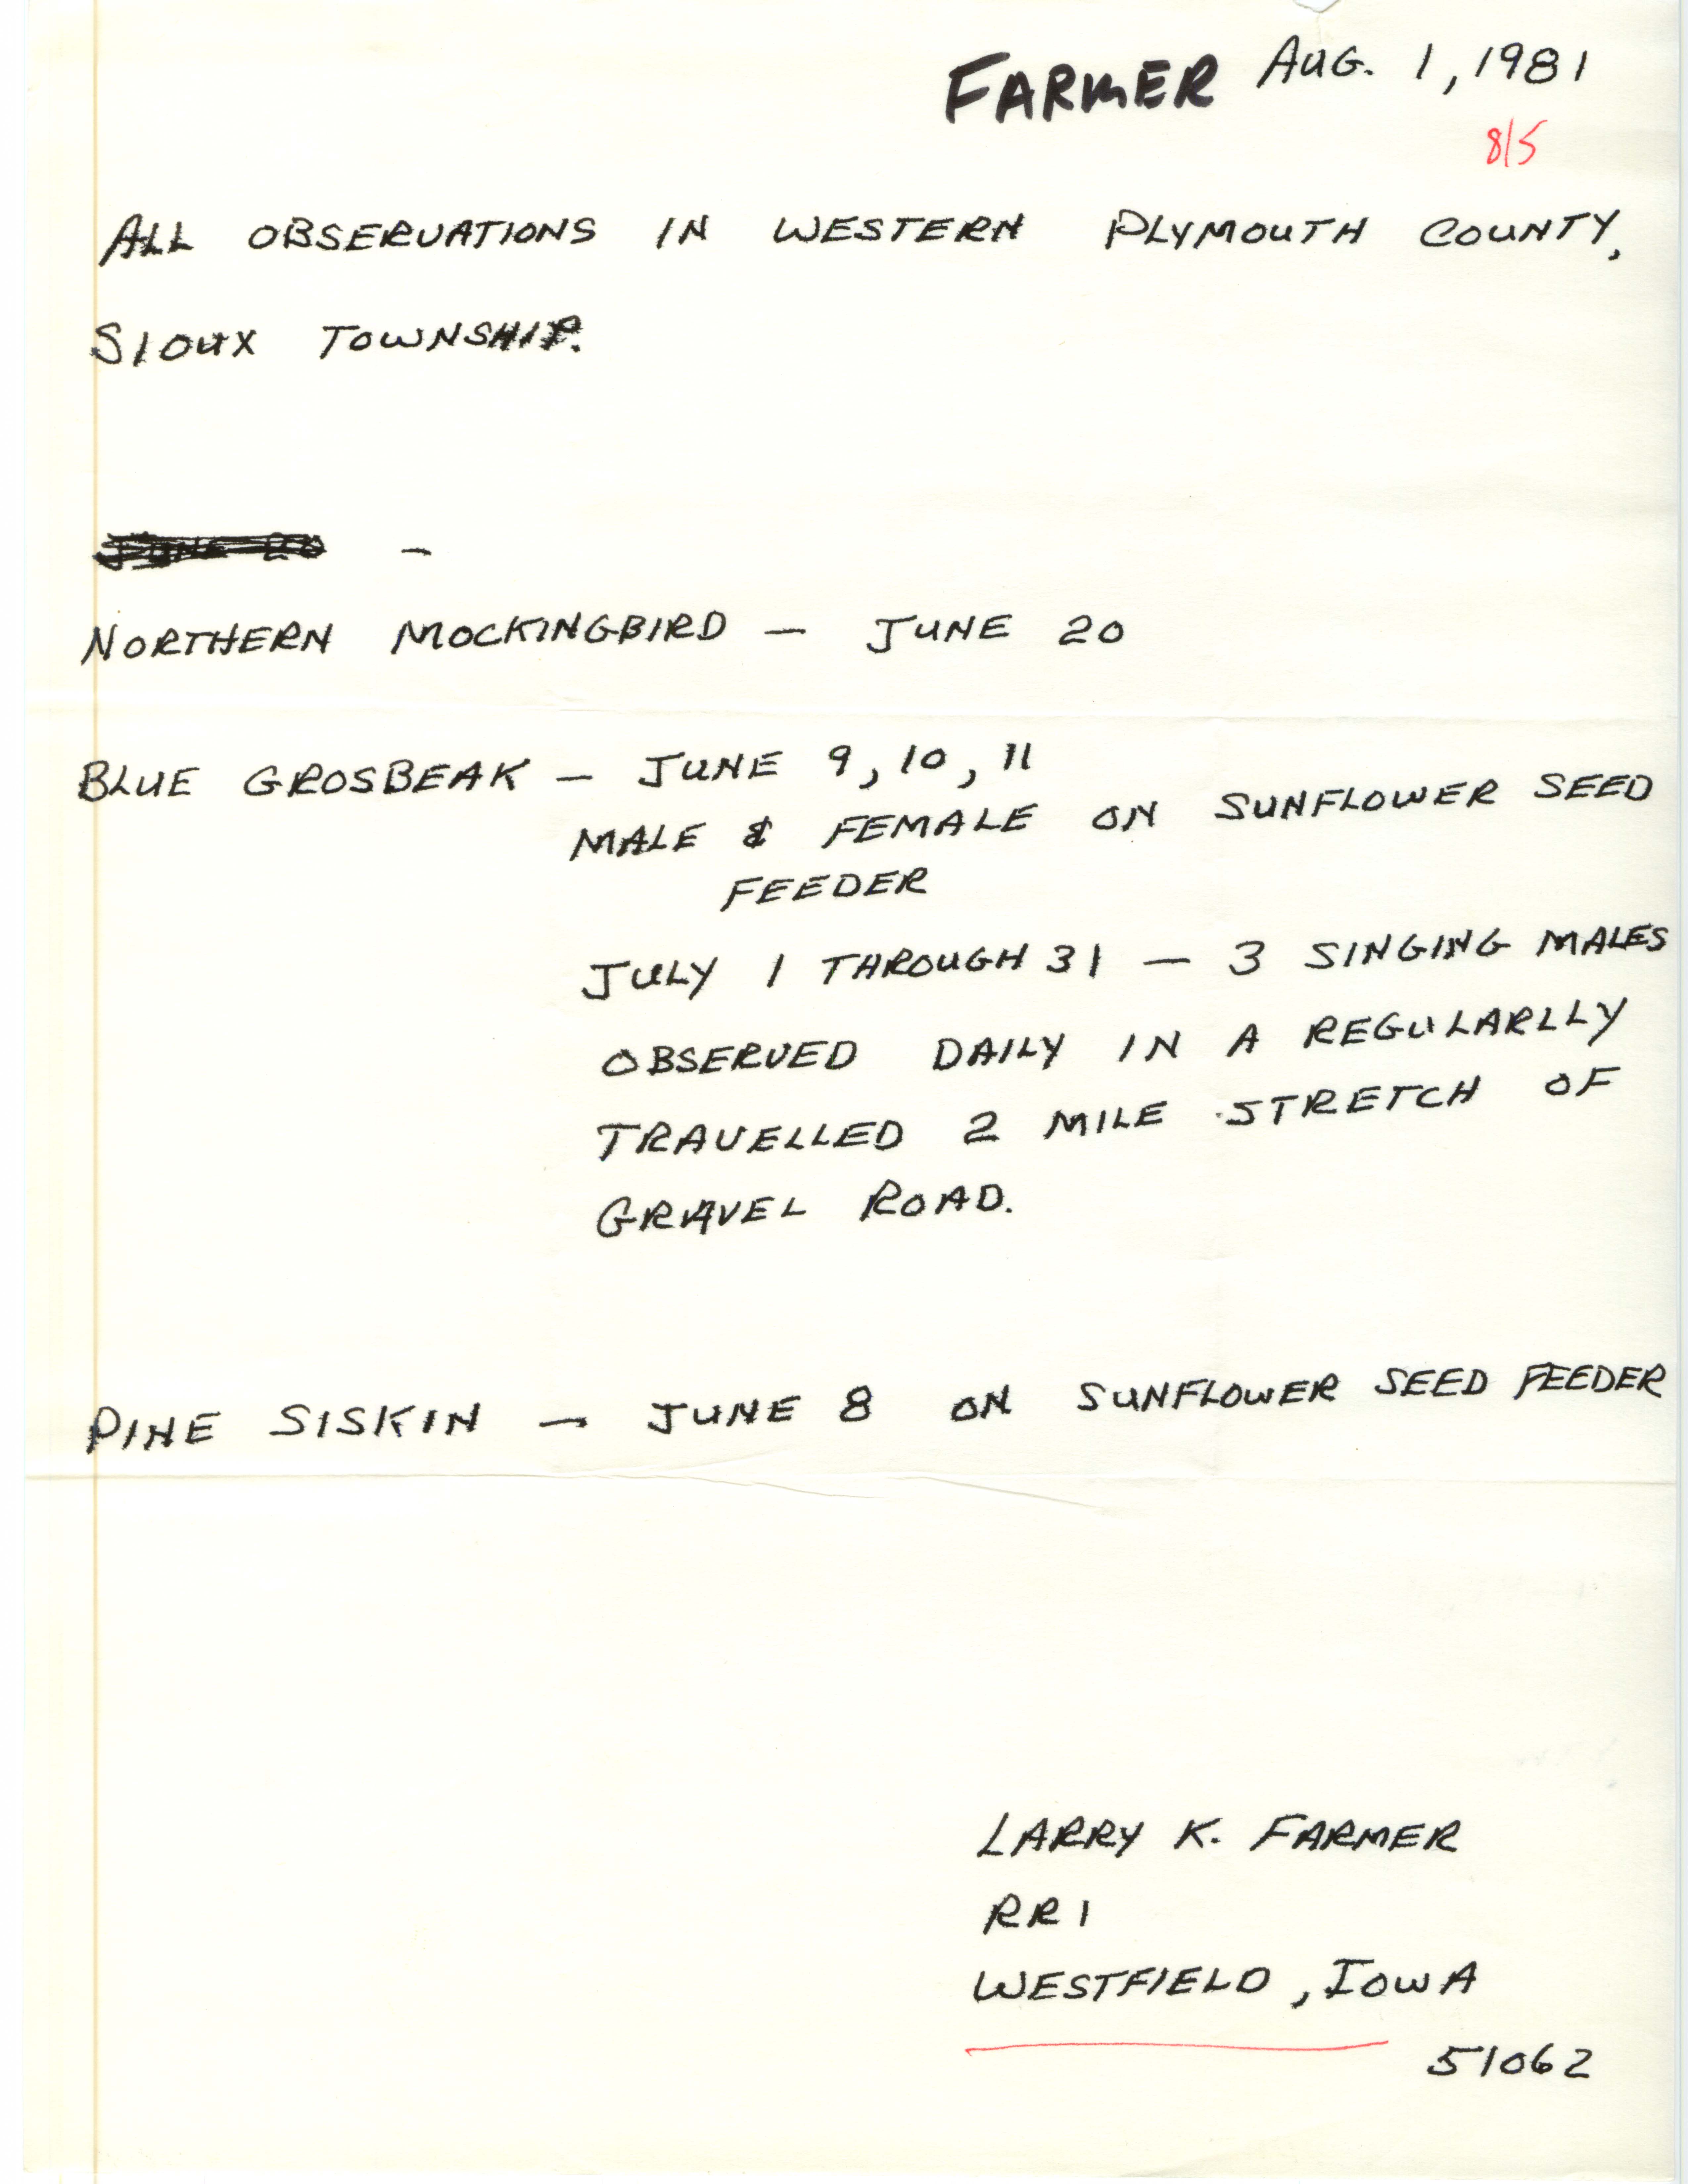 Field notes contributed by Larry Farmer, August 1, 1981